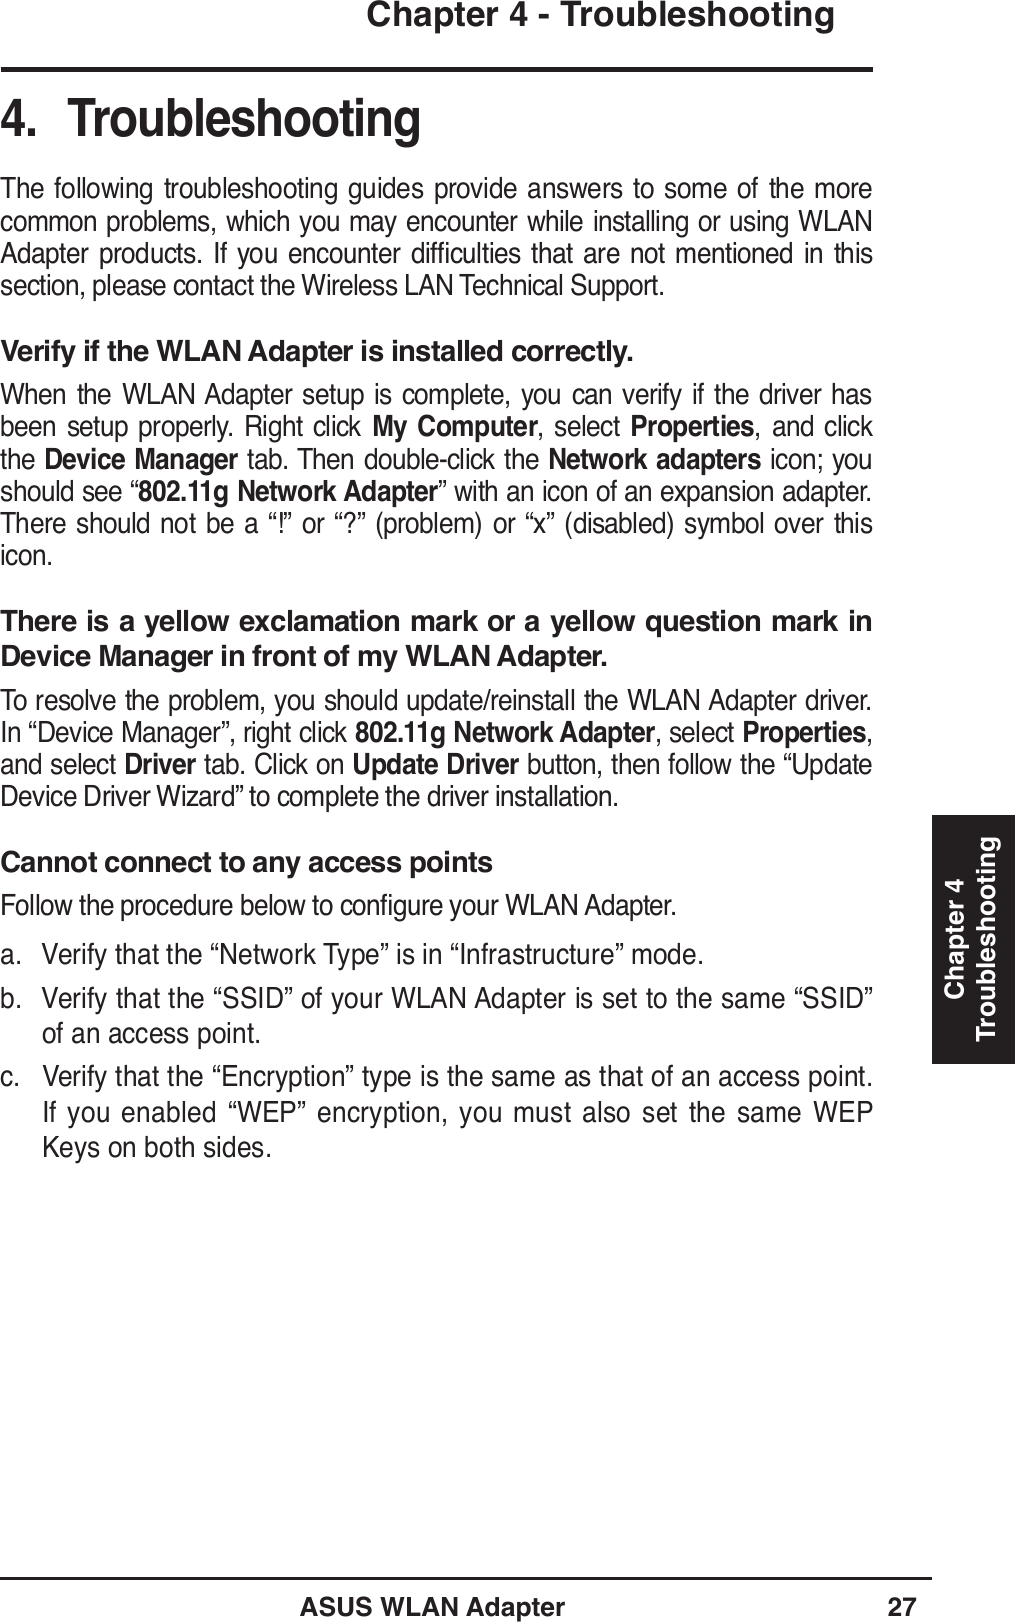 ASUS WLAN Adapter 27Chapter 4 - TroubleshootingChapter 4Troubleshooting4. TroubleshootingThe following troubleshooting guides provide answers to some of the more common problems, which you may encounter while installing or using WLAN $GDSWHU SURGXFWV ,I \RX HQFRXQWHU GLIÀFXOWLHV WKDW DUH QRW PHQWLRQHG LQ WKLVsection, please contact the Wireless LAN Technical Support.Verify if the WLAN Adapter is installed correctly.When the WLAN Adapter setup is complete, you can verify if the driver has been setup properly. Right click My Computer, select Properties, and click the Device Manager tab. Then double-click the Network adapters icon; you should see “802.11g Network Adapter” with an icon of an expansion adapter. There should not be a “!” or “?” (problem) or “x” (disabled) symbol over this icon. There is a yellow exclamation mark or a yellow question mark in Device Manager in front of my WLAN Adapter.To resolve the problem, you should update/reinstall the WLAN Adapter driver. In “Device Manager”, right click 802.11g Network Adapter, select Properties, and select Driver tab. Click on Update Driver button, then follow the “Update &apos;HYLFH&apos;ULYHU:L]DUGµWRFRPSOHWHWKHGULYHULQVWDOODWLRQCannot connect to any access points)ROORZWKHSURFHGXUHEHORZWRFRQÀJXUH\RXU:/$1$GDSWHUa. Verify that the “Network Type” is in “Infrastructure” mode.b. Verify that the “SSID” of your WLAN Adapter is set to the same “SSID” of an access point.c. Verify that the “Encryption” type is the same as that of an access point. If you enabled “WEP” encryption, you must also set the same WEP Keys on both sides.